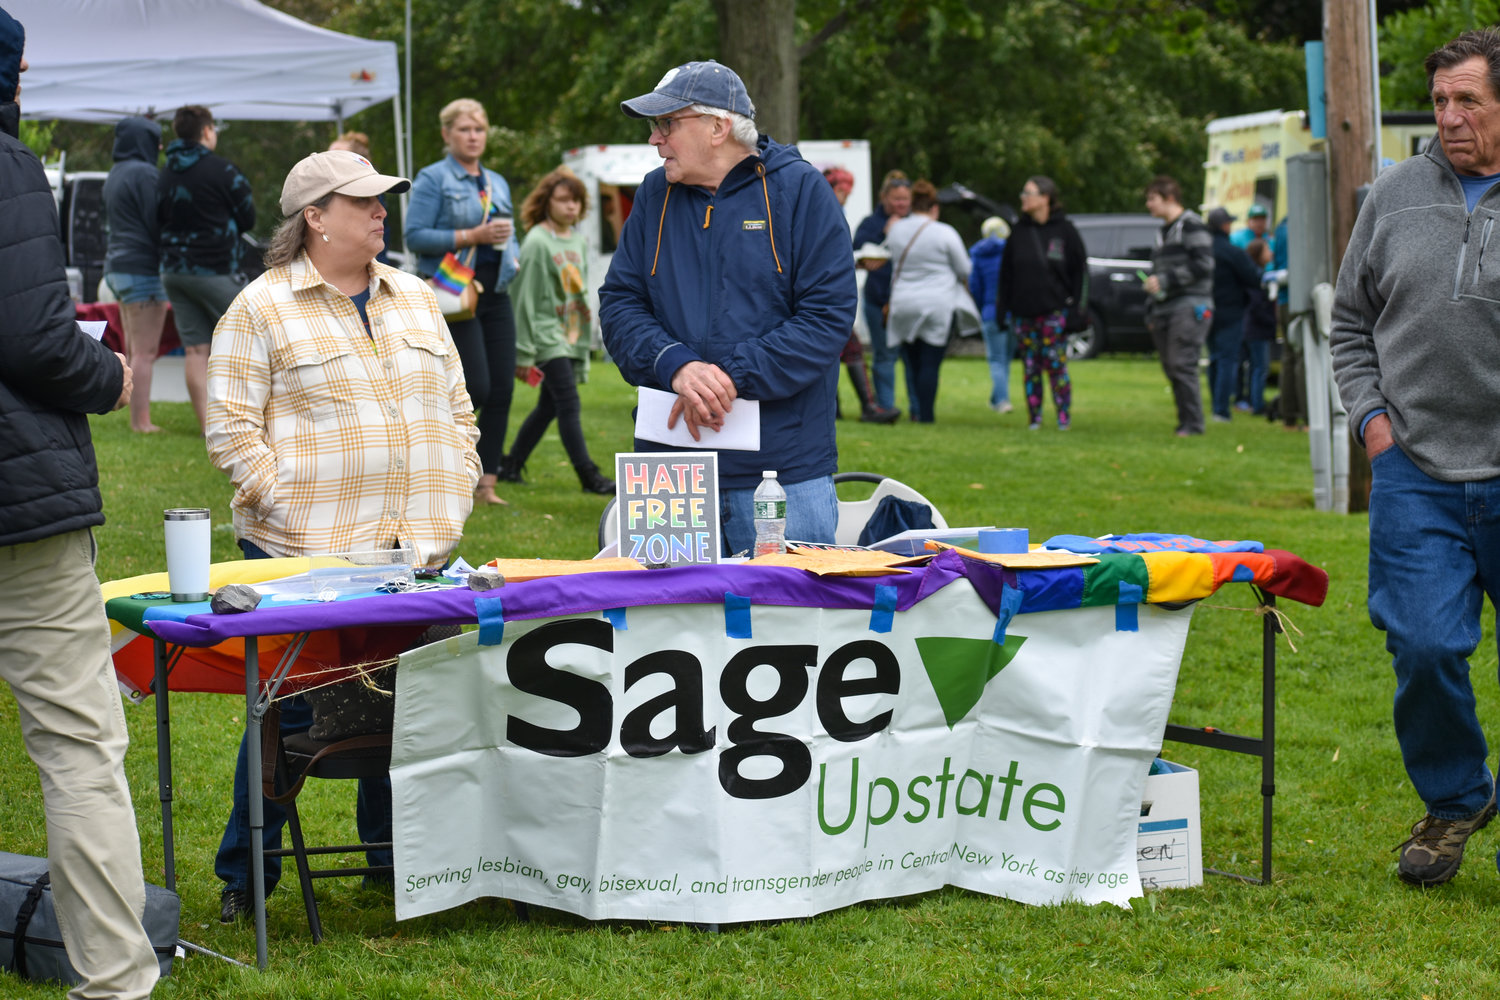 LGBTQ+ support organizations like Sage Upstate shared information with attendants at Caz Pride Fest on Saturday. Sage Upstate offers programs and outreach to counter isolation and improve health for older LGBTQ people.